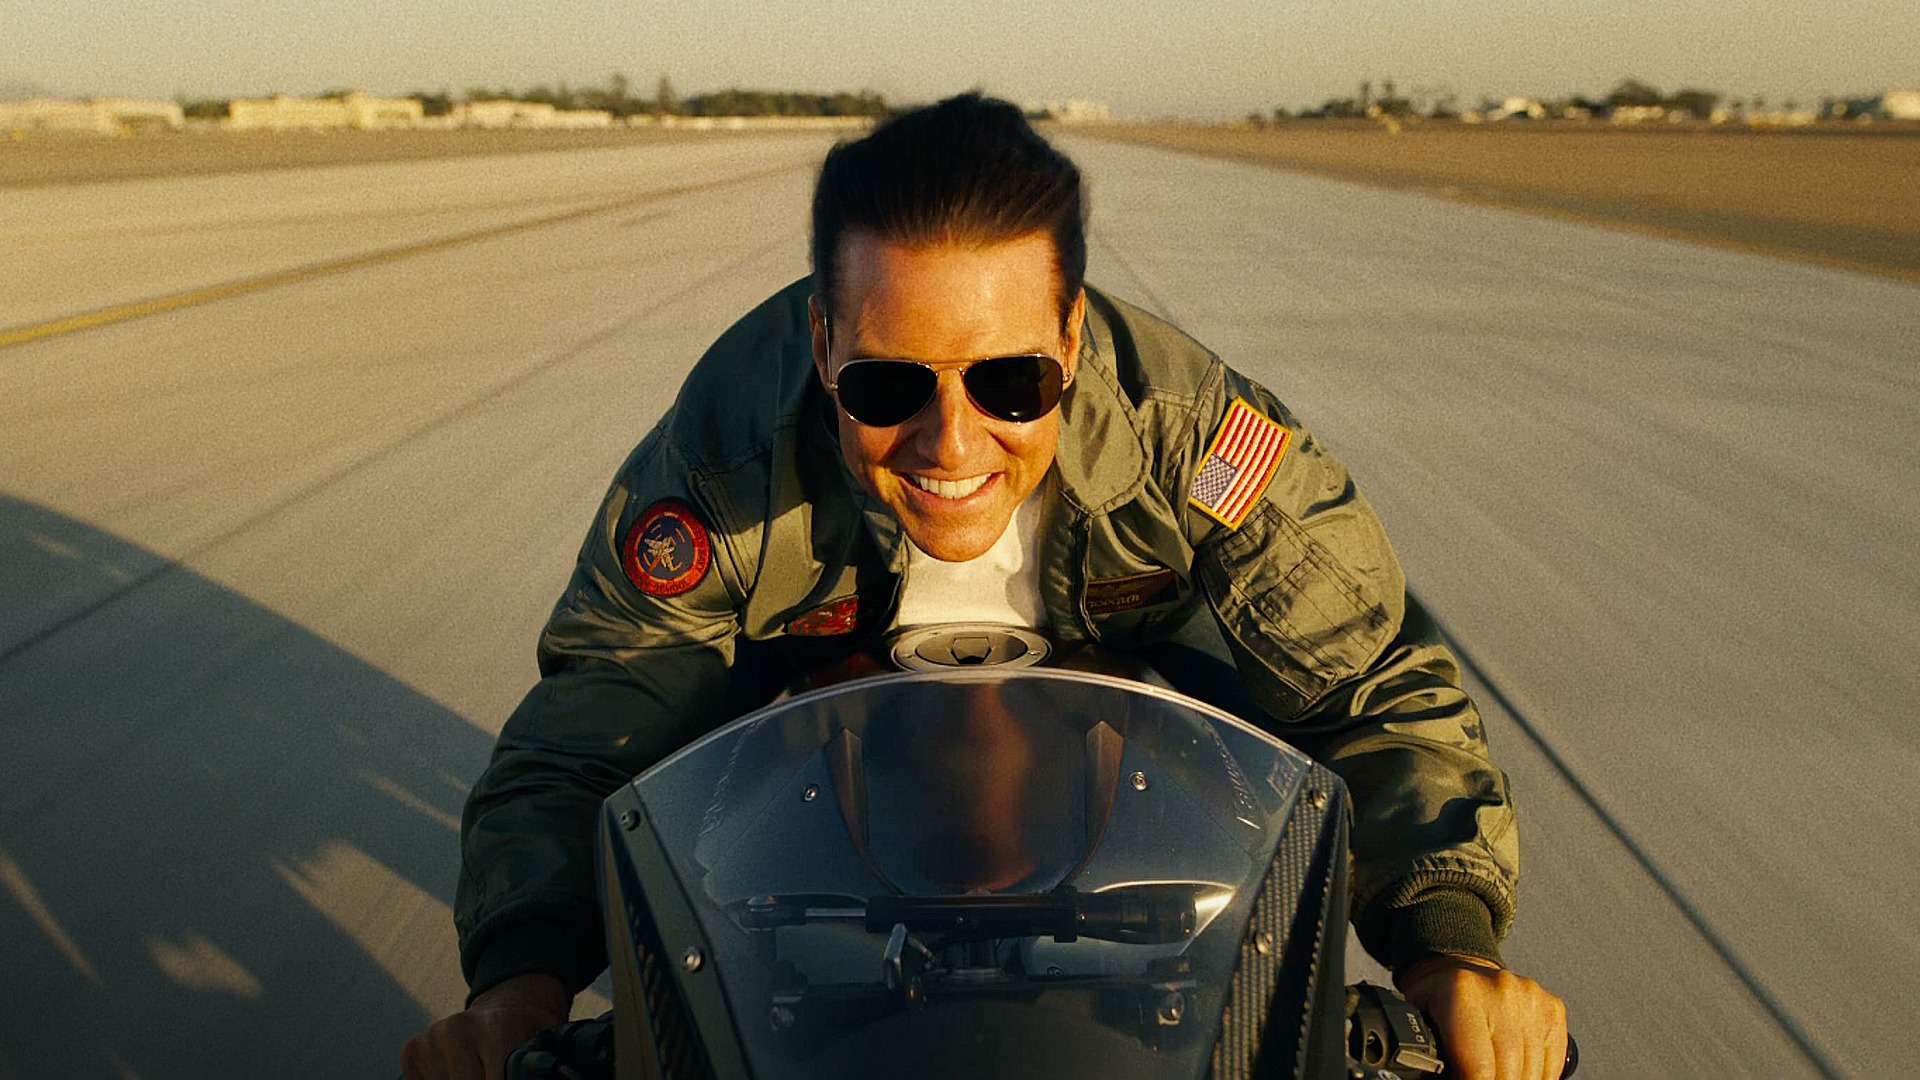 The Cast of 'Top Gun: Maverick' Knew the Movie Was Worth the Wait